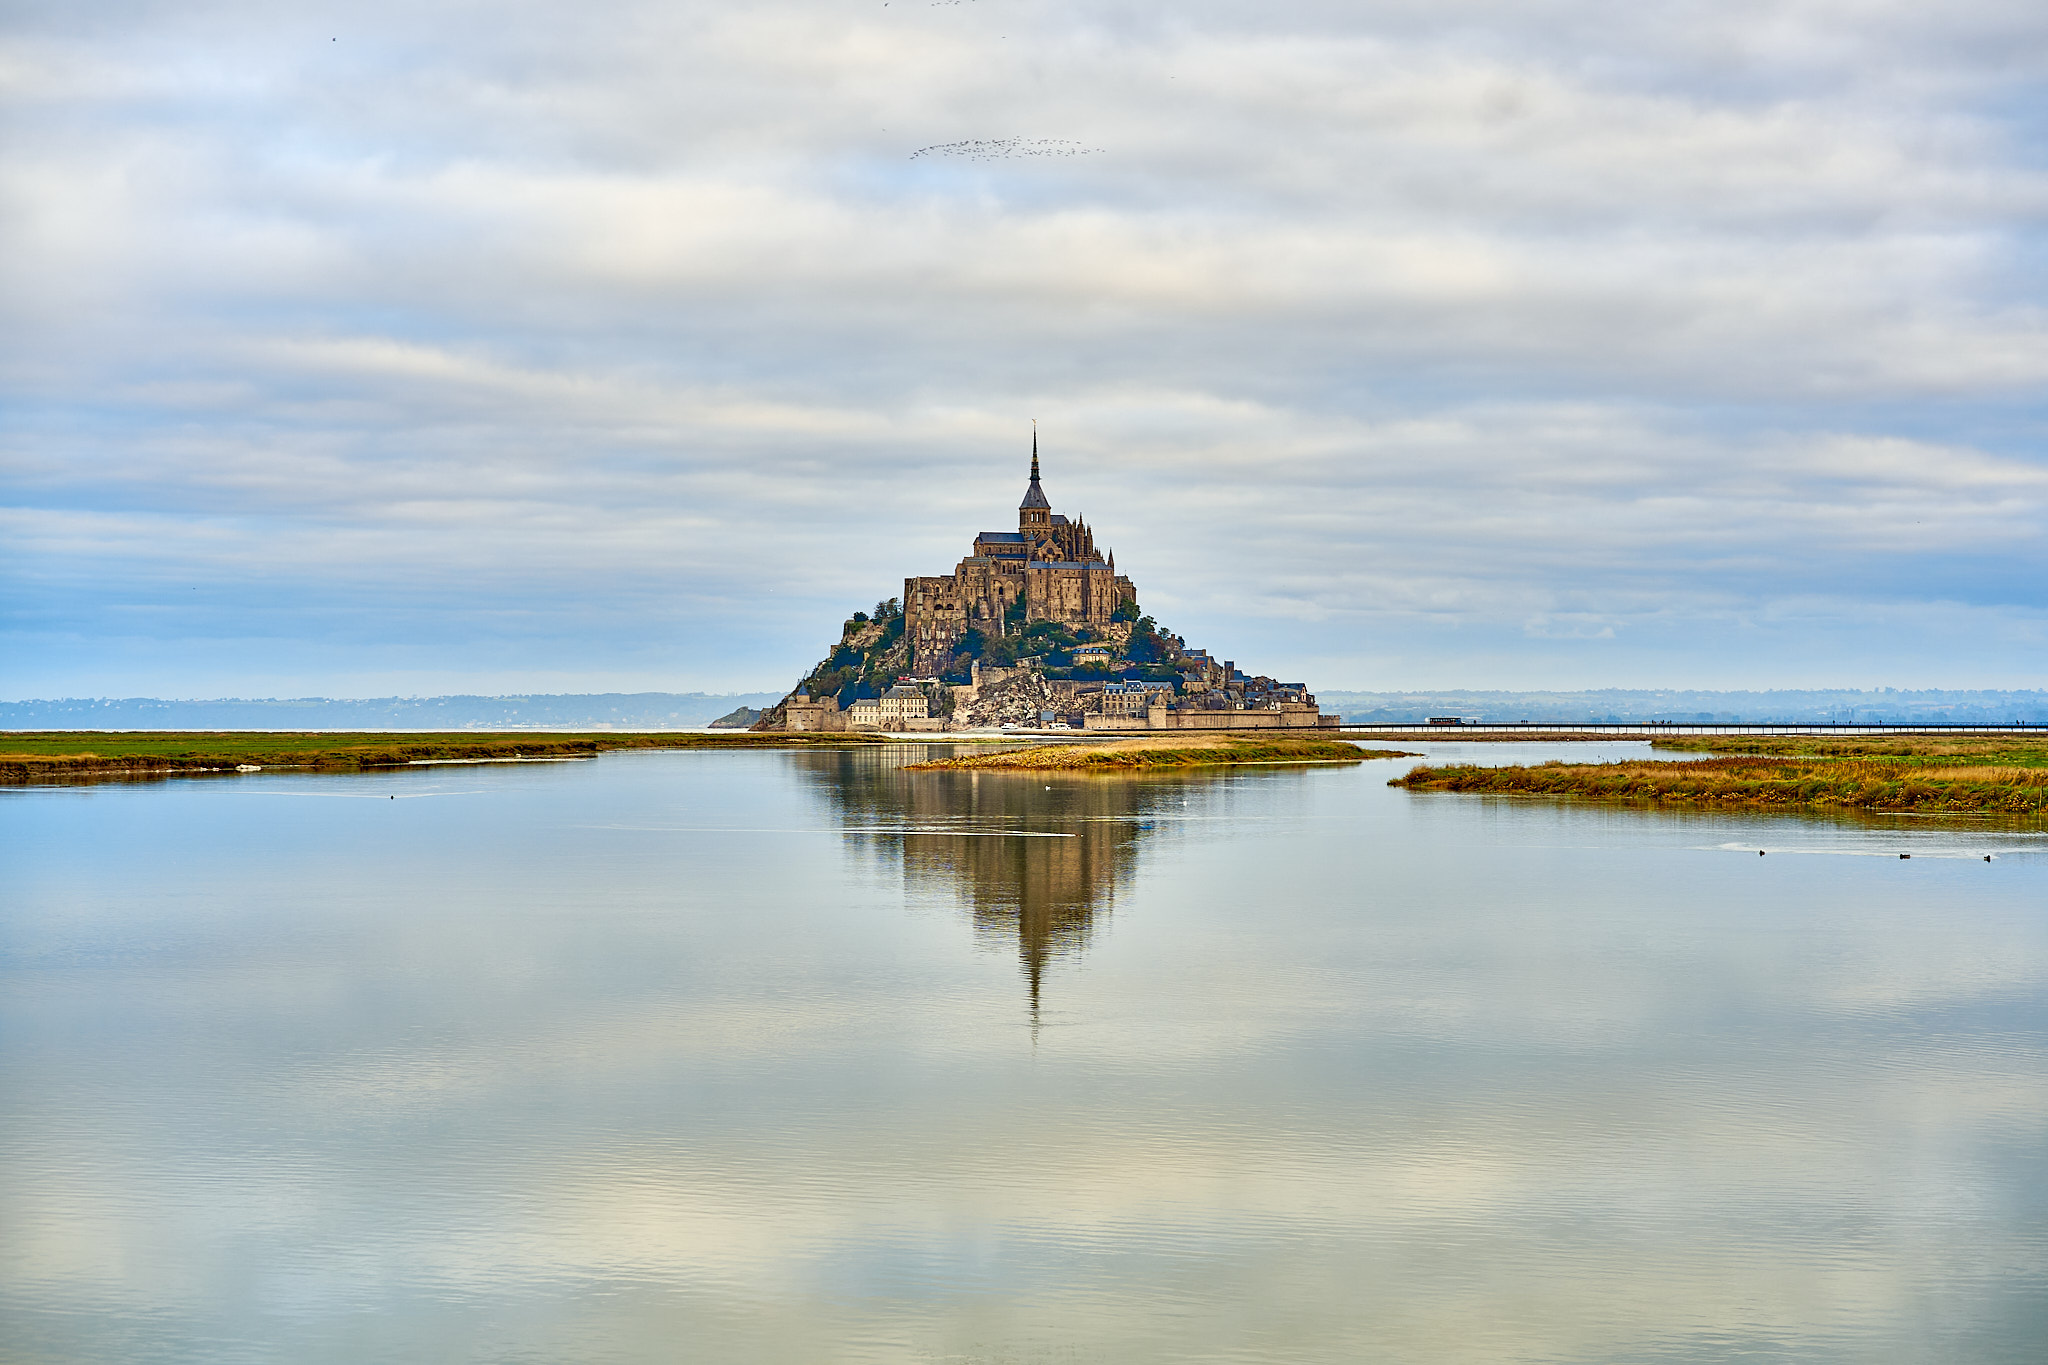 One of Mont Saint Michel Photo Spots, from the Dam